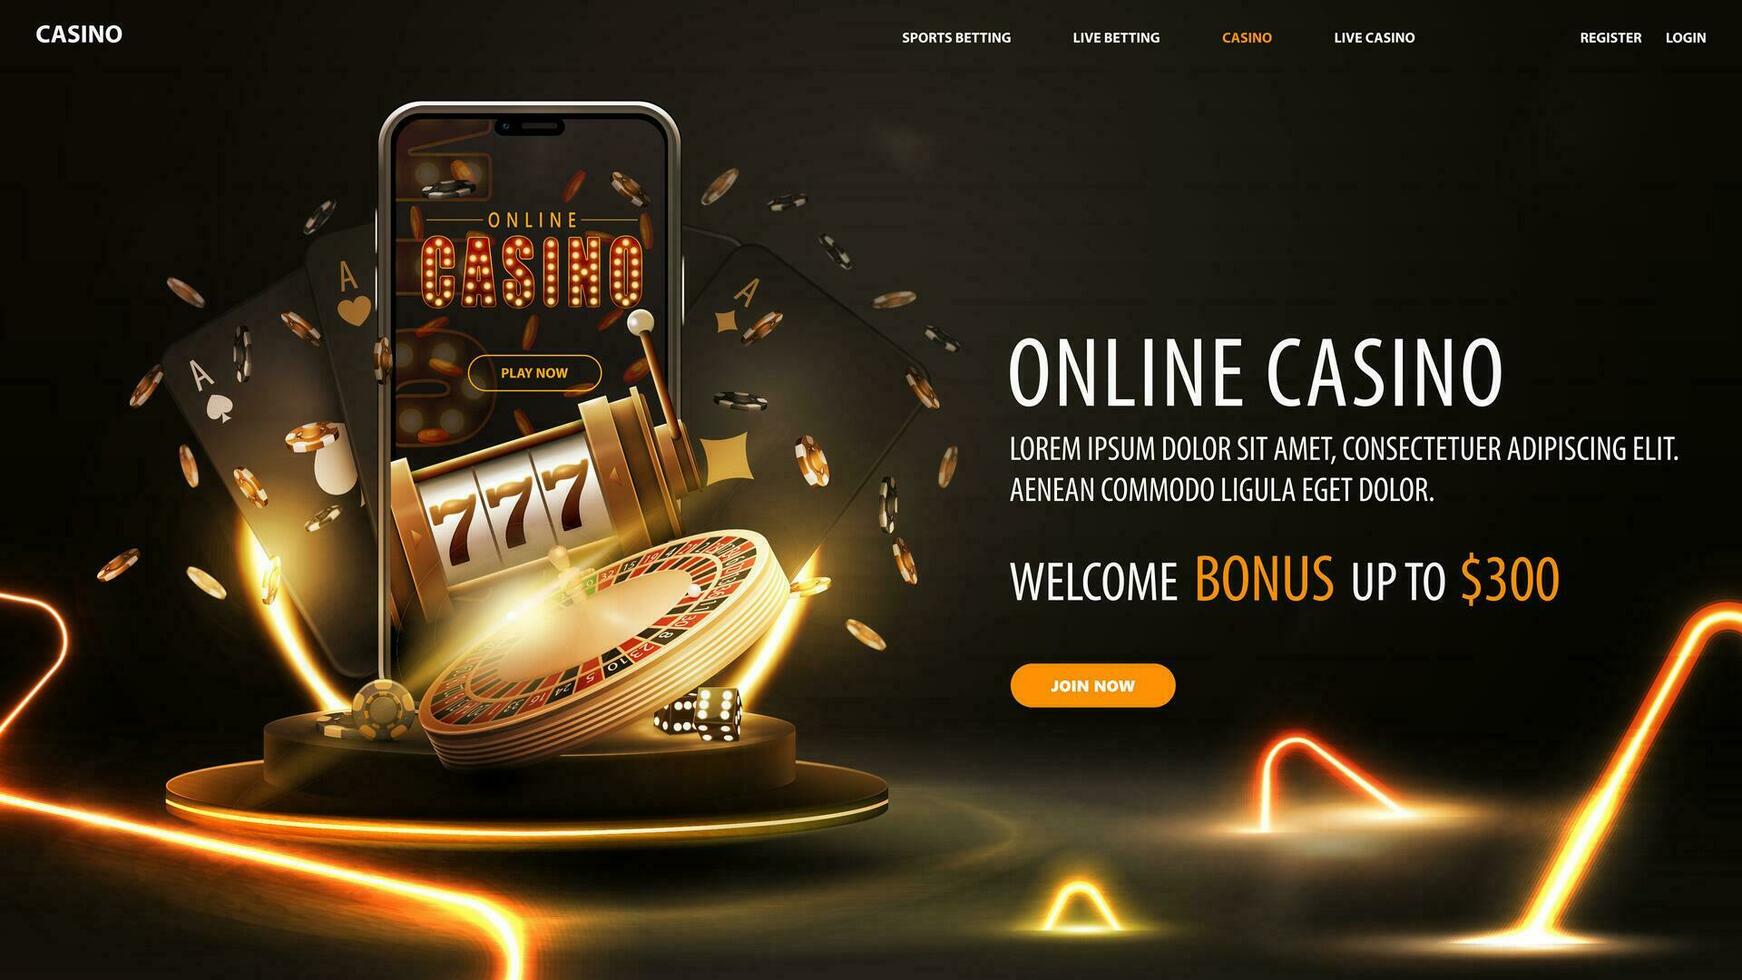 Online casino, welcome bonus, black banner with offer, podium with smartphone, casino slot machine, Casino Roulette, cards and poker chips in dark scene with gold neon triangles around vector